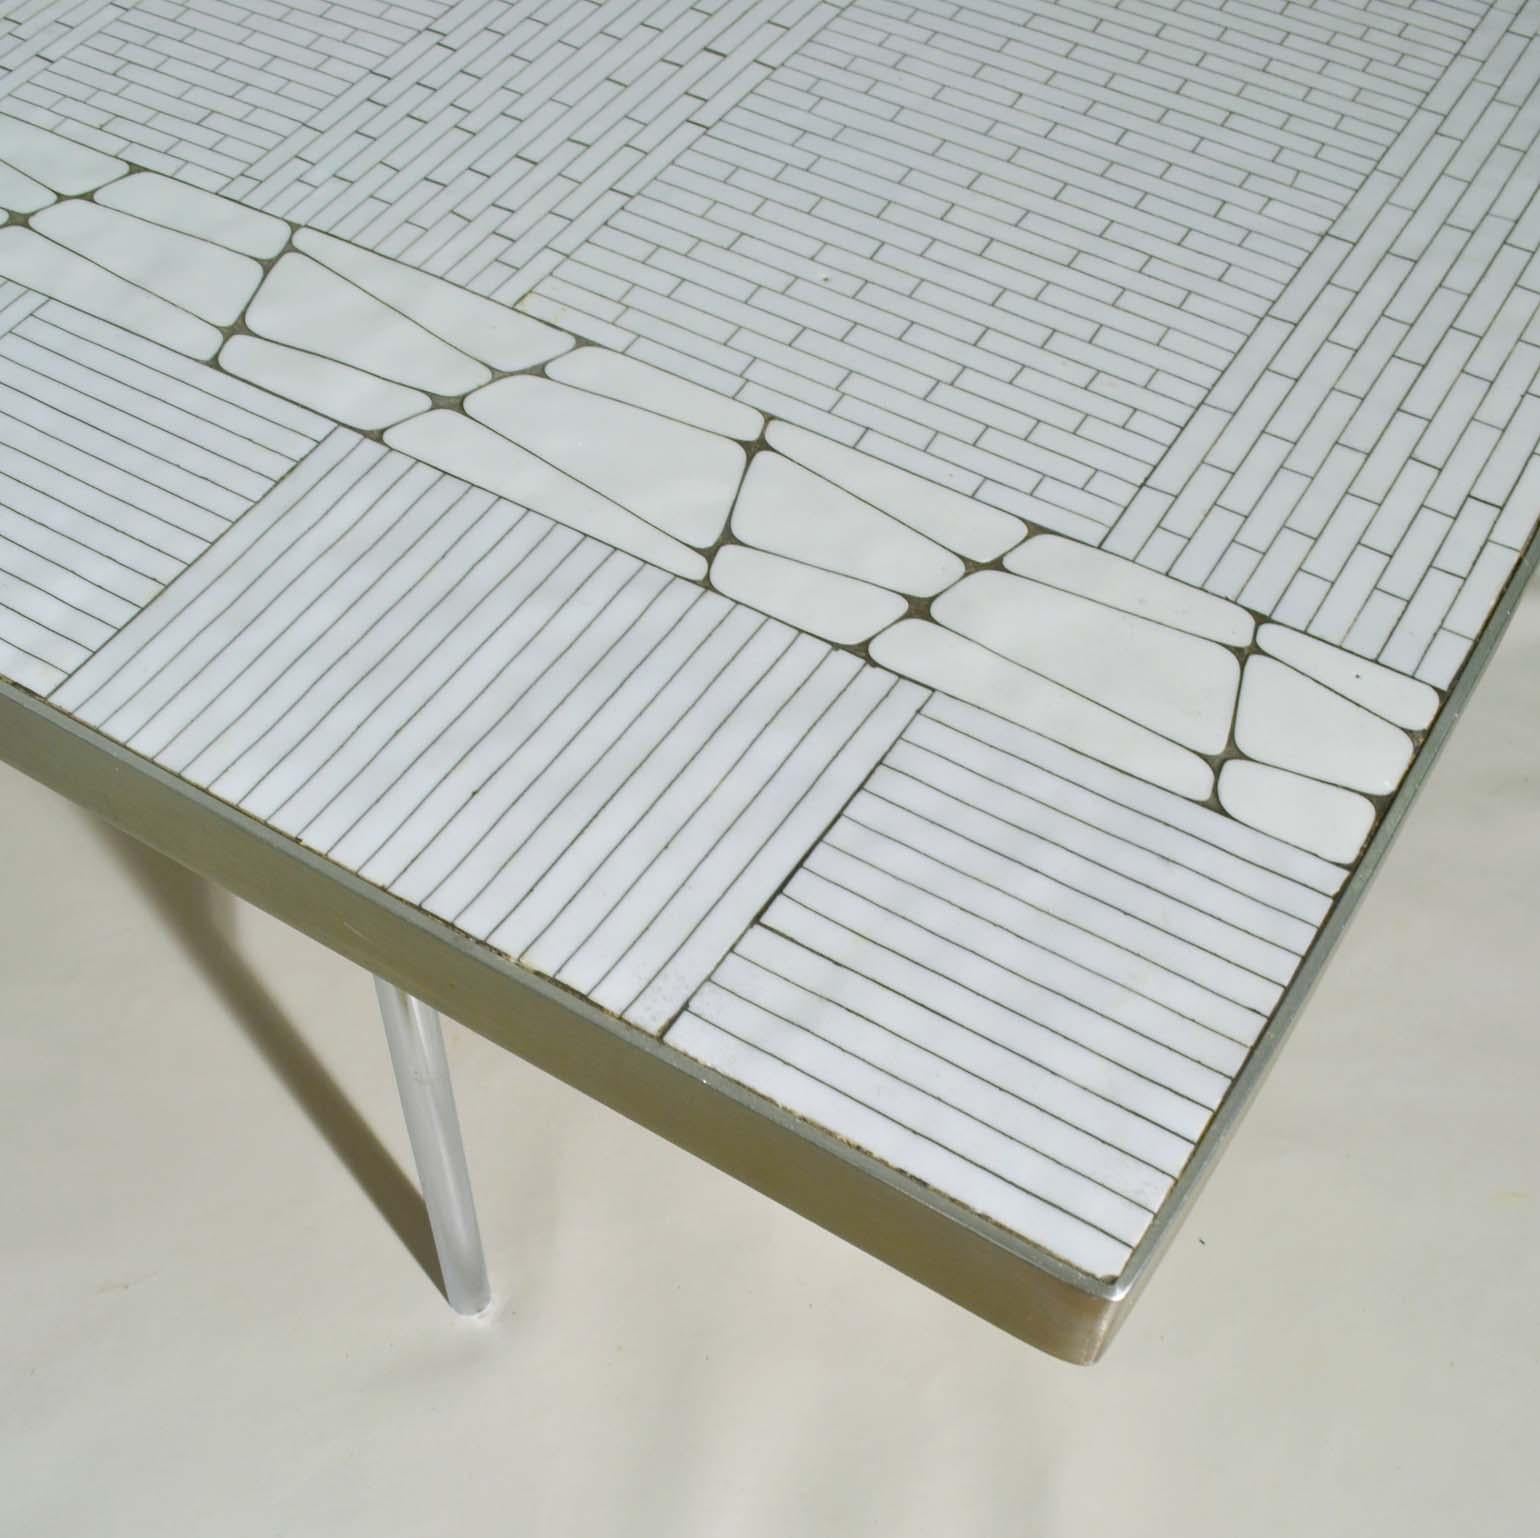 Rectangular Minimalist white mosaic coffee table is made of hundreds of glass squares and rectangles to form an abstract motif, popular in 1950's-1970''s. The edges of the table are wrapped in polished aluminium. The table rests on four chrome legs